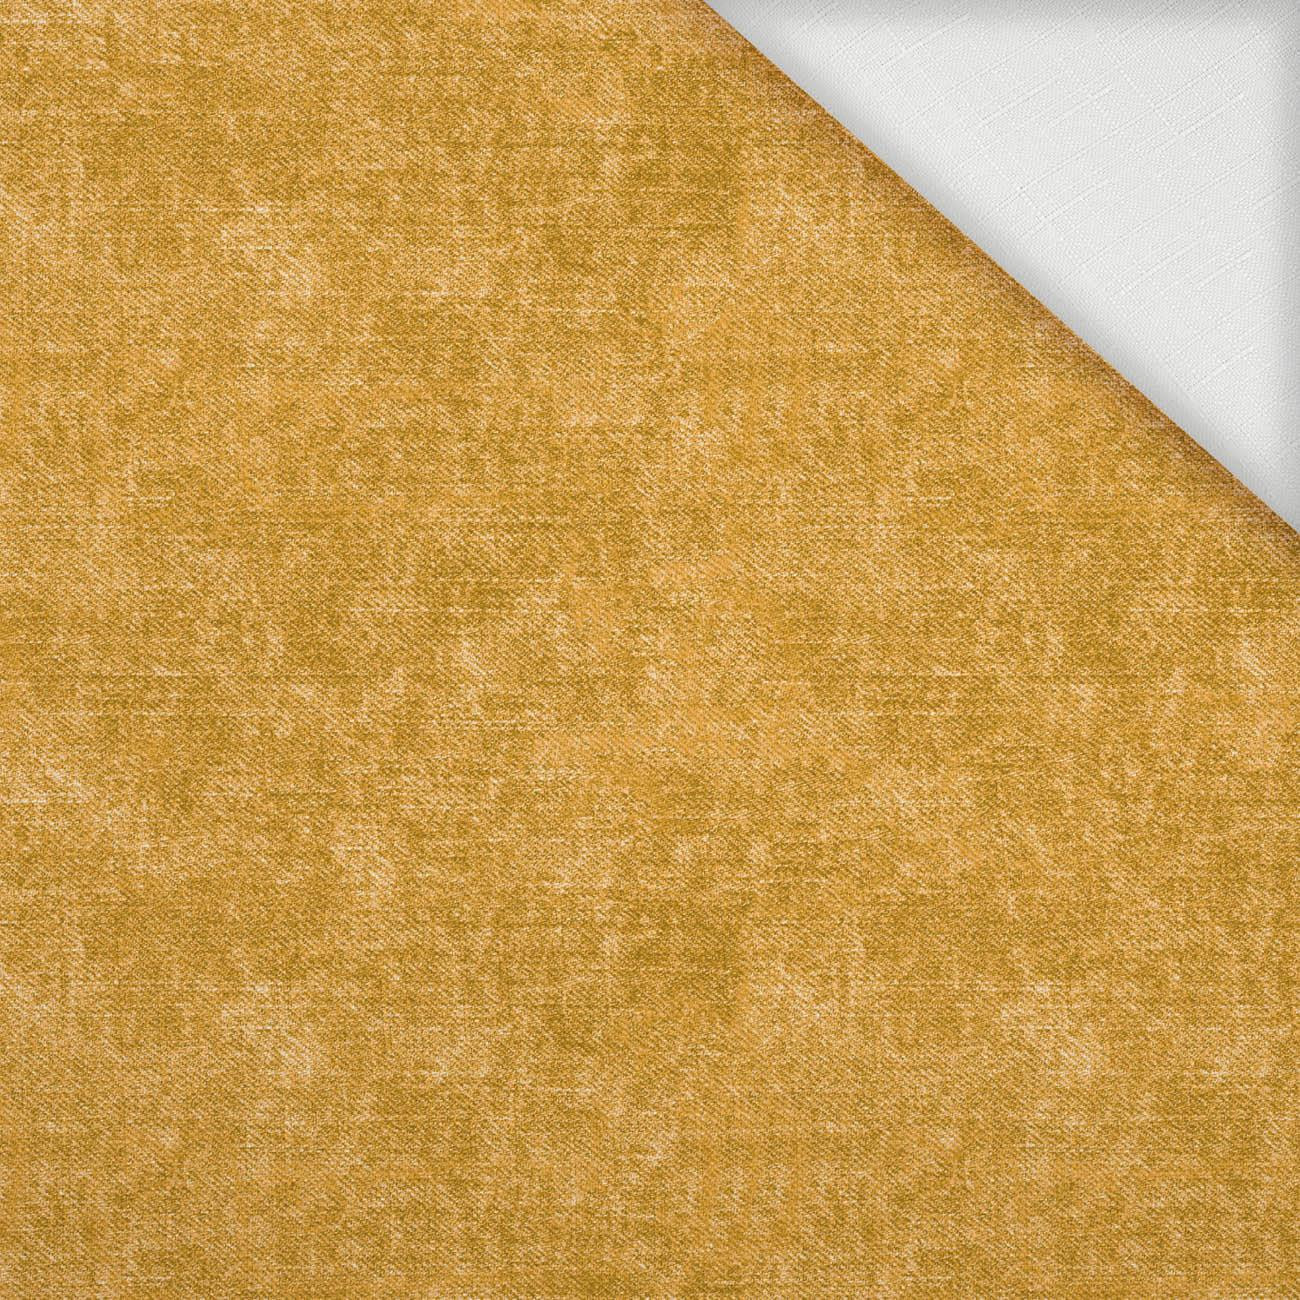 ACID WASH / MUSTARD  - Woven Fabric for tablecloths